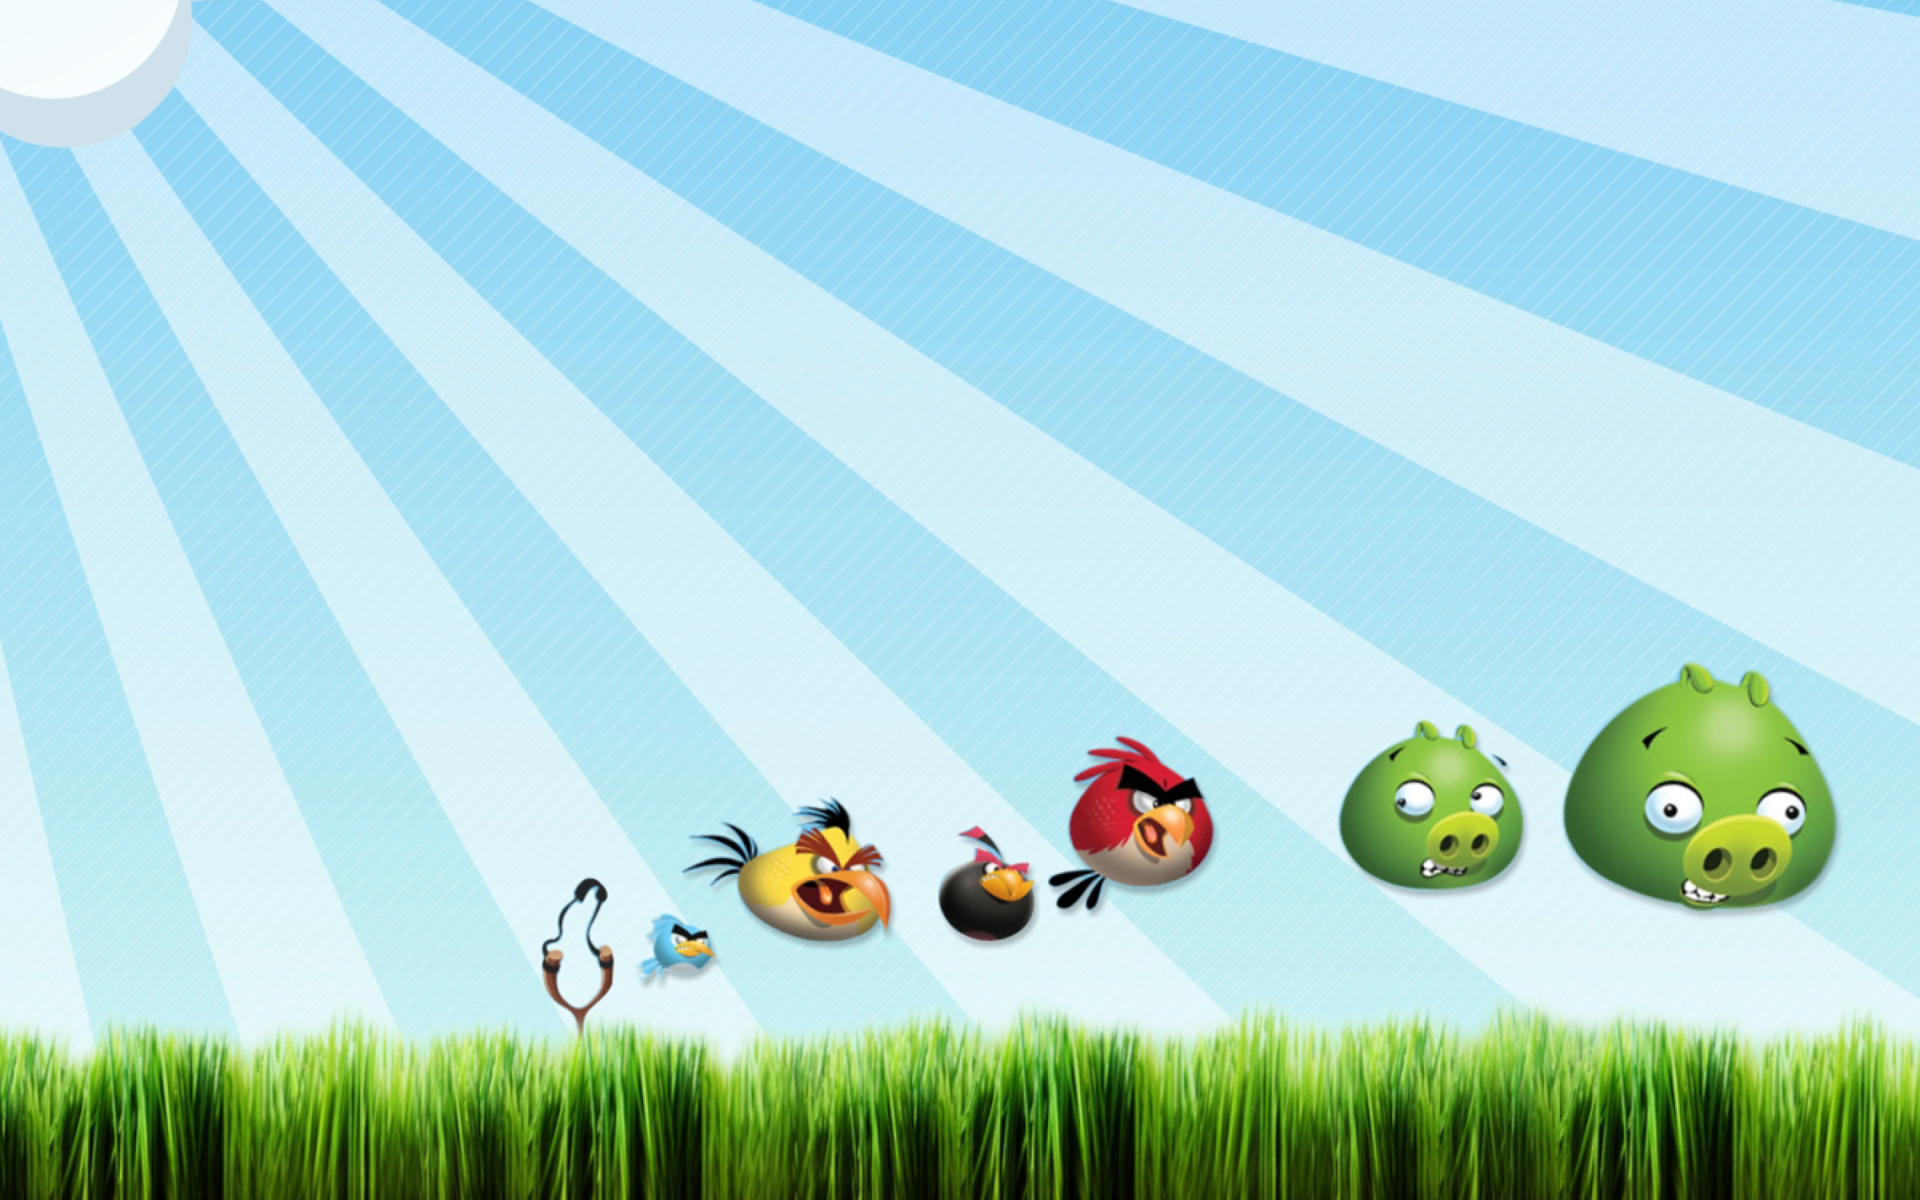 Angry Birds Bad Pigs wallpaper 1920x1200